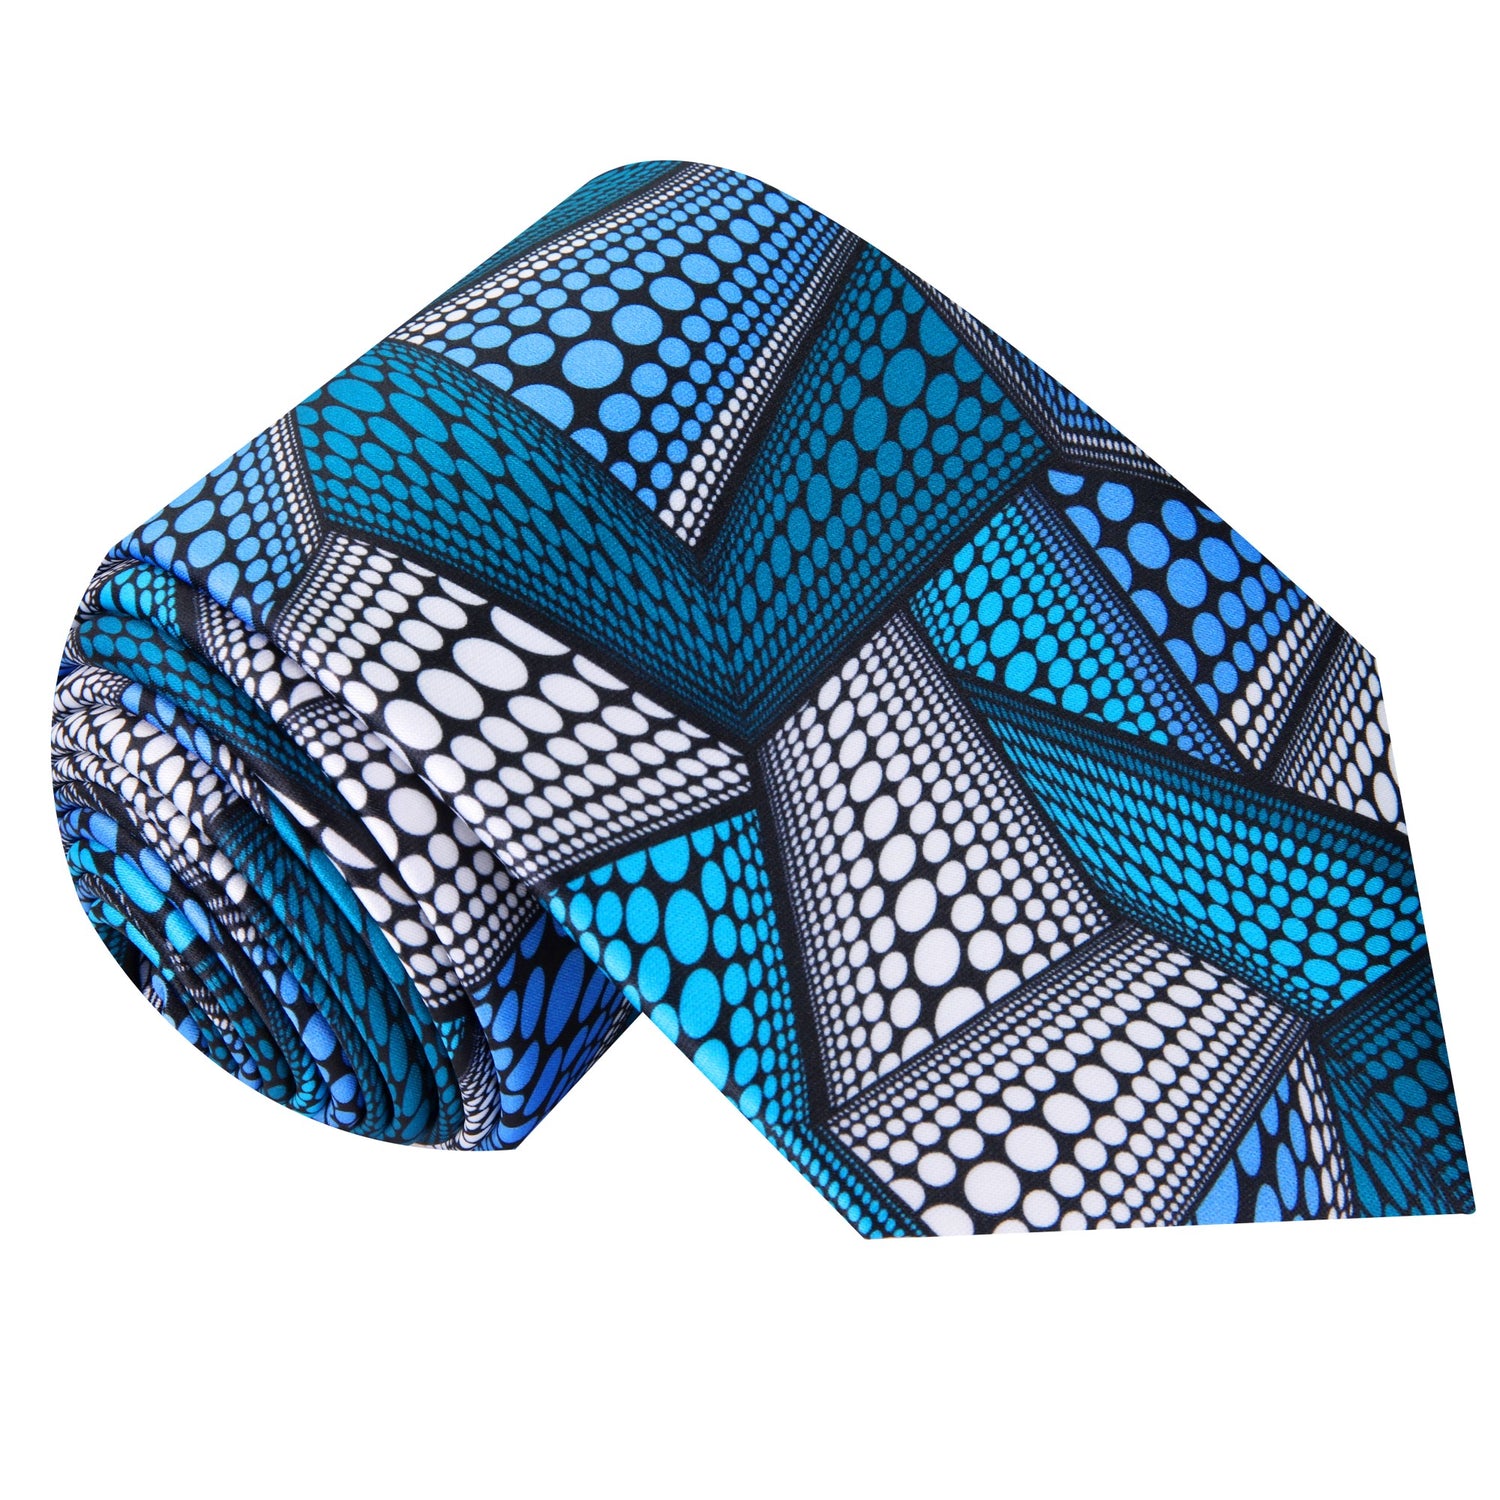 An Abstract Blue and White Necktie 